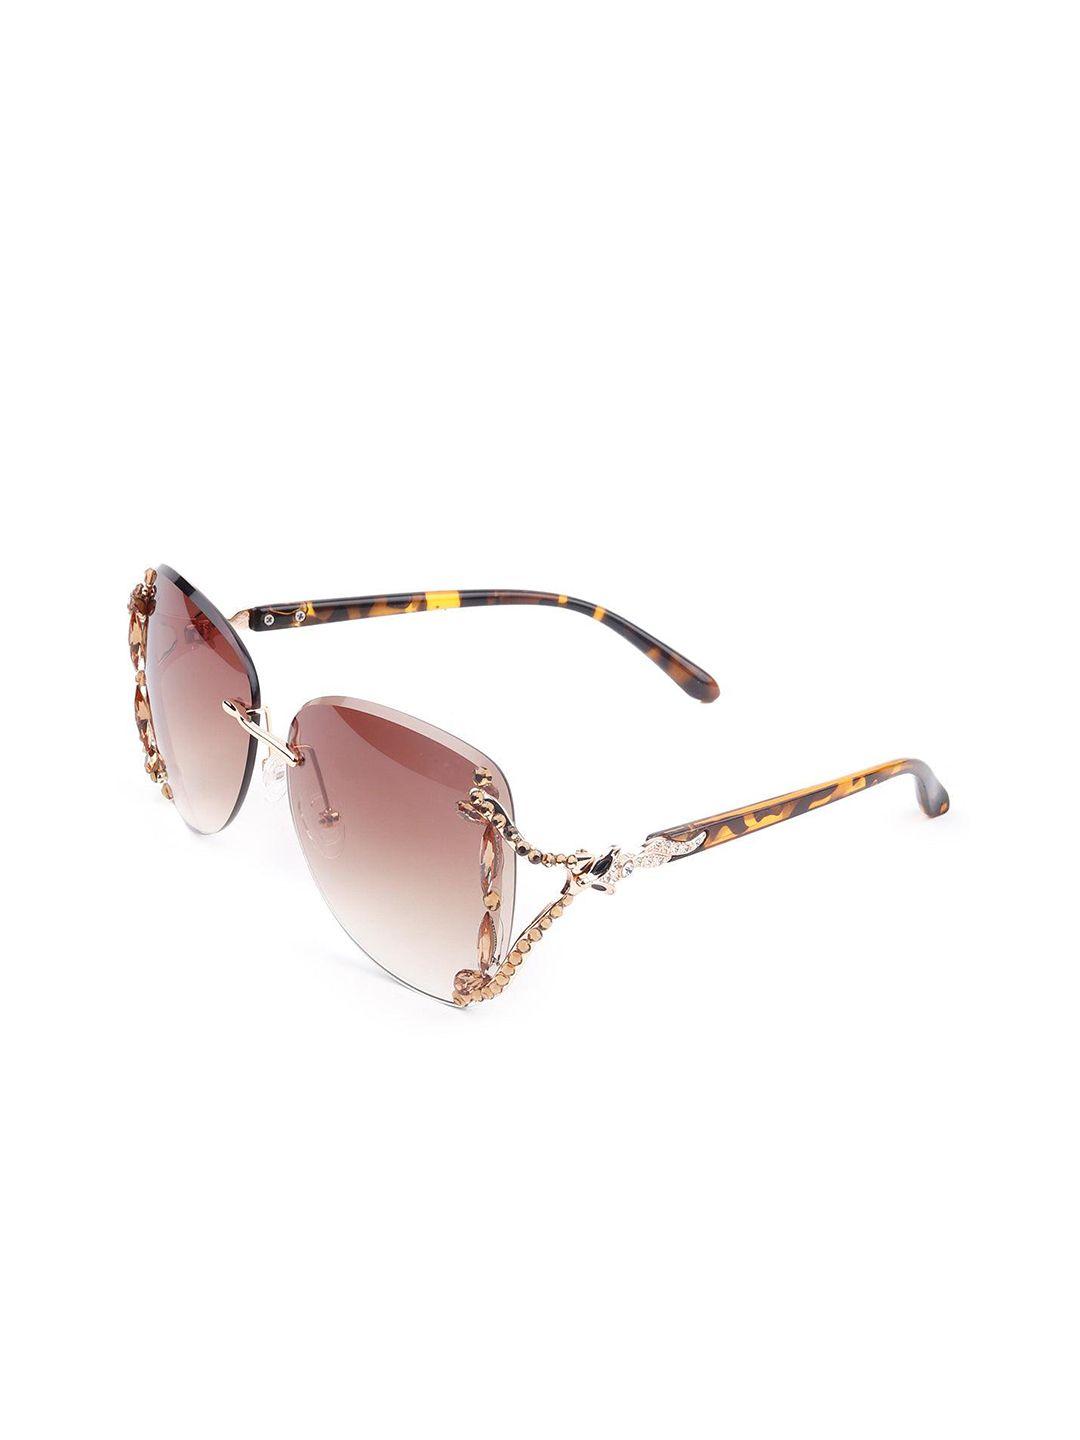 odette-women-cateye-sunglasses-with-uv-protected-lens